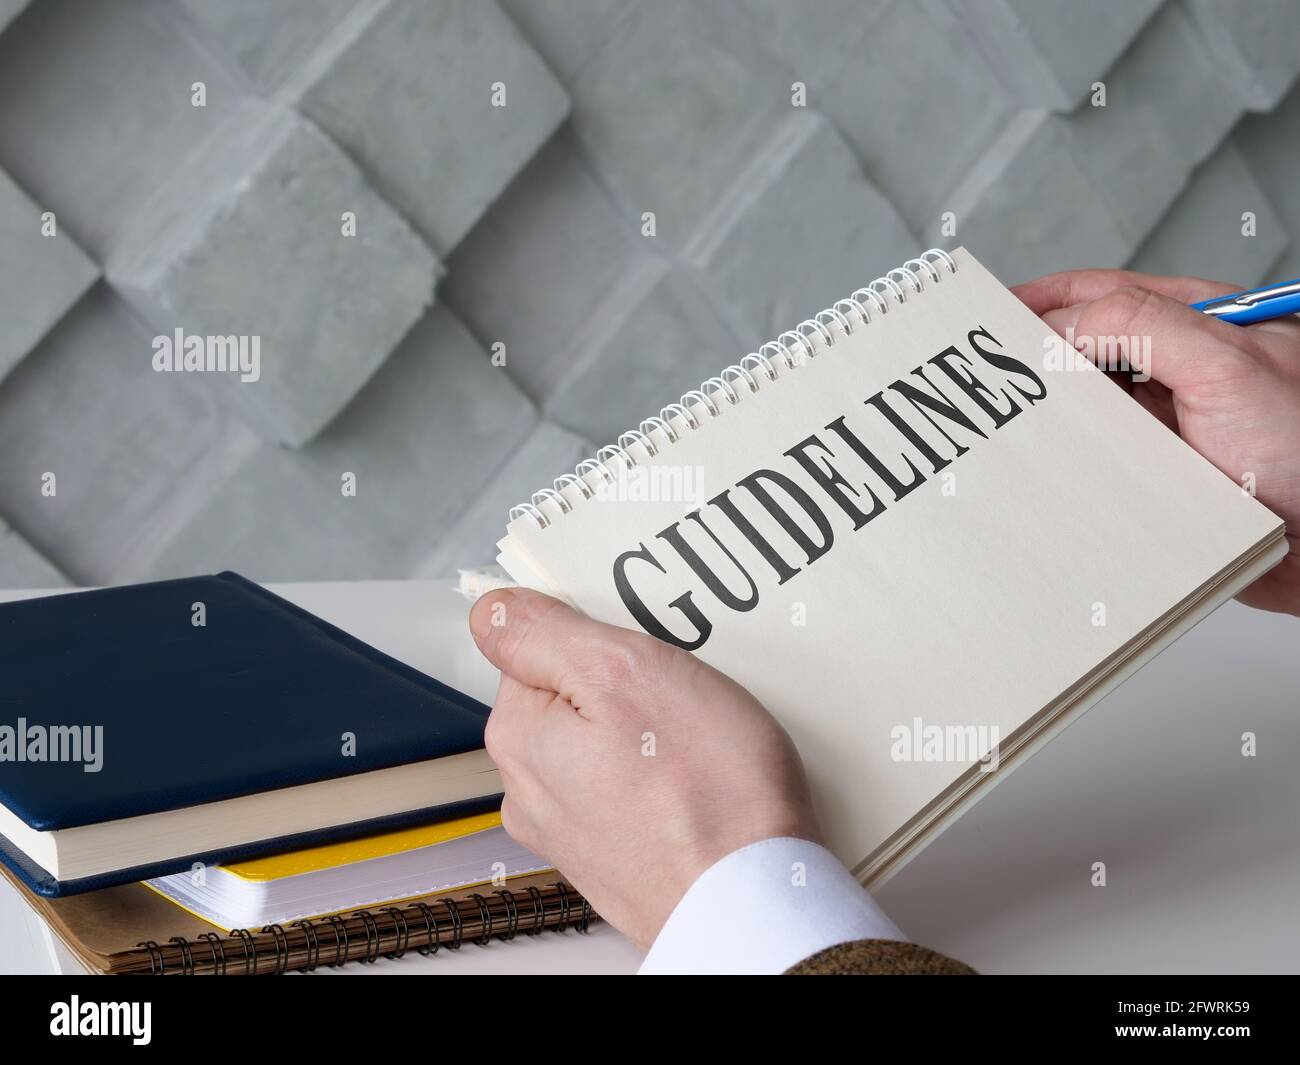 Manager reads Guidelines and holds blue pen. Stock Photo